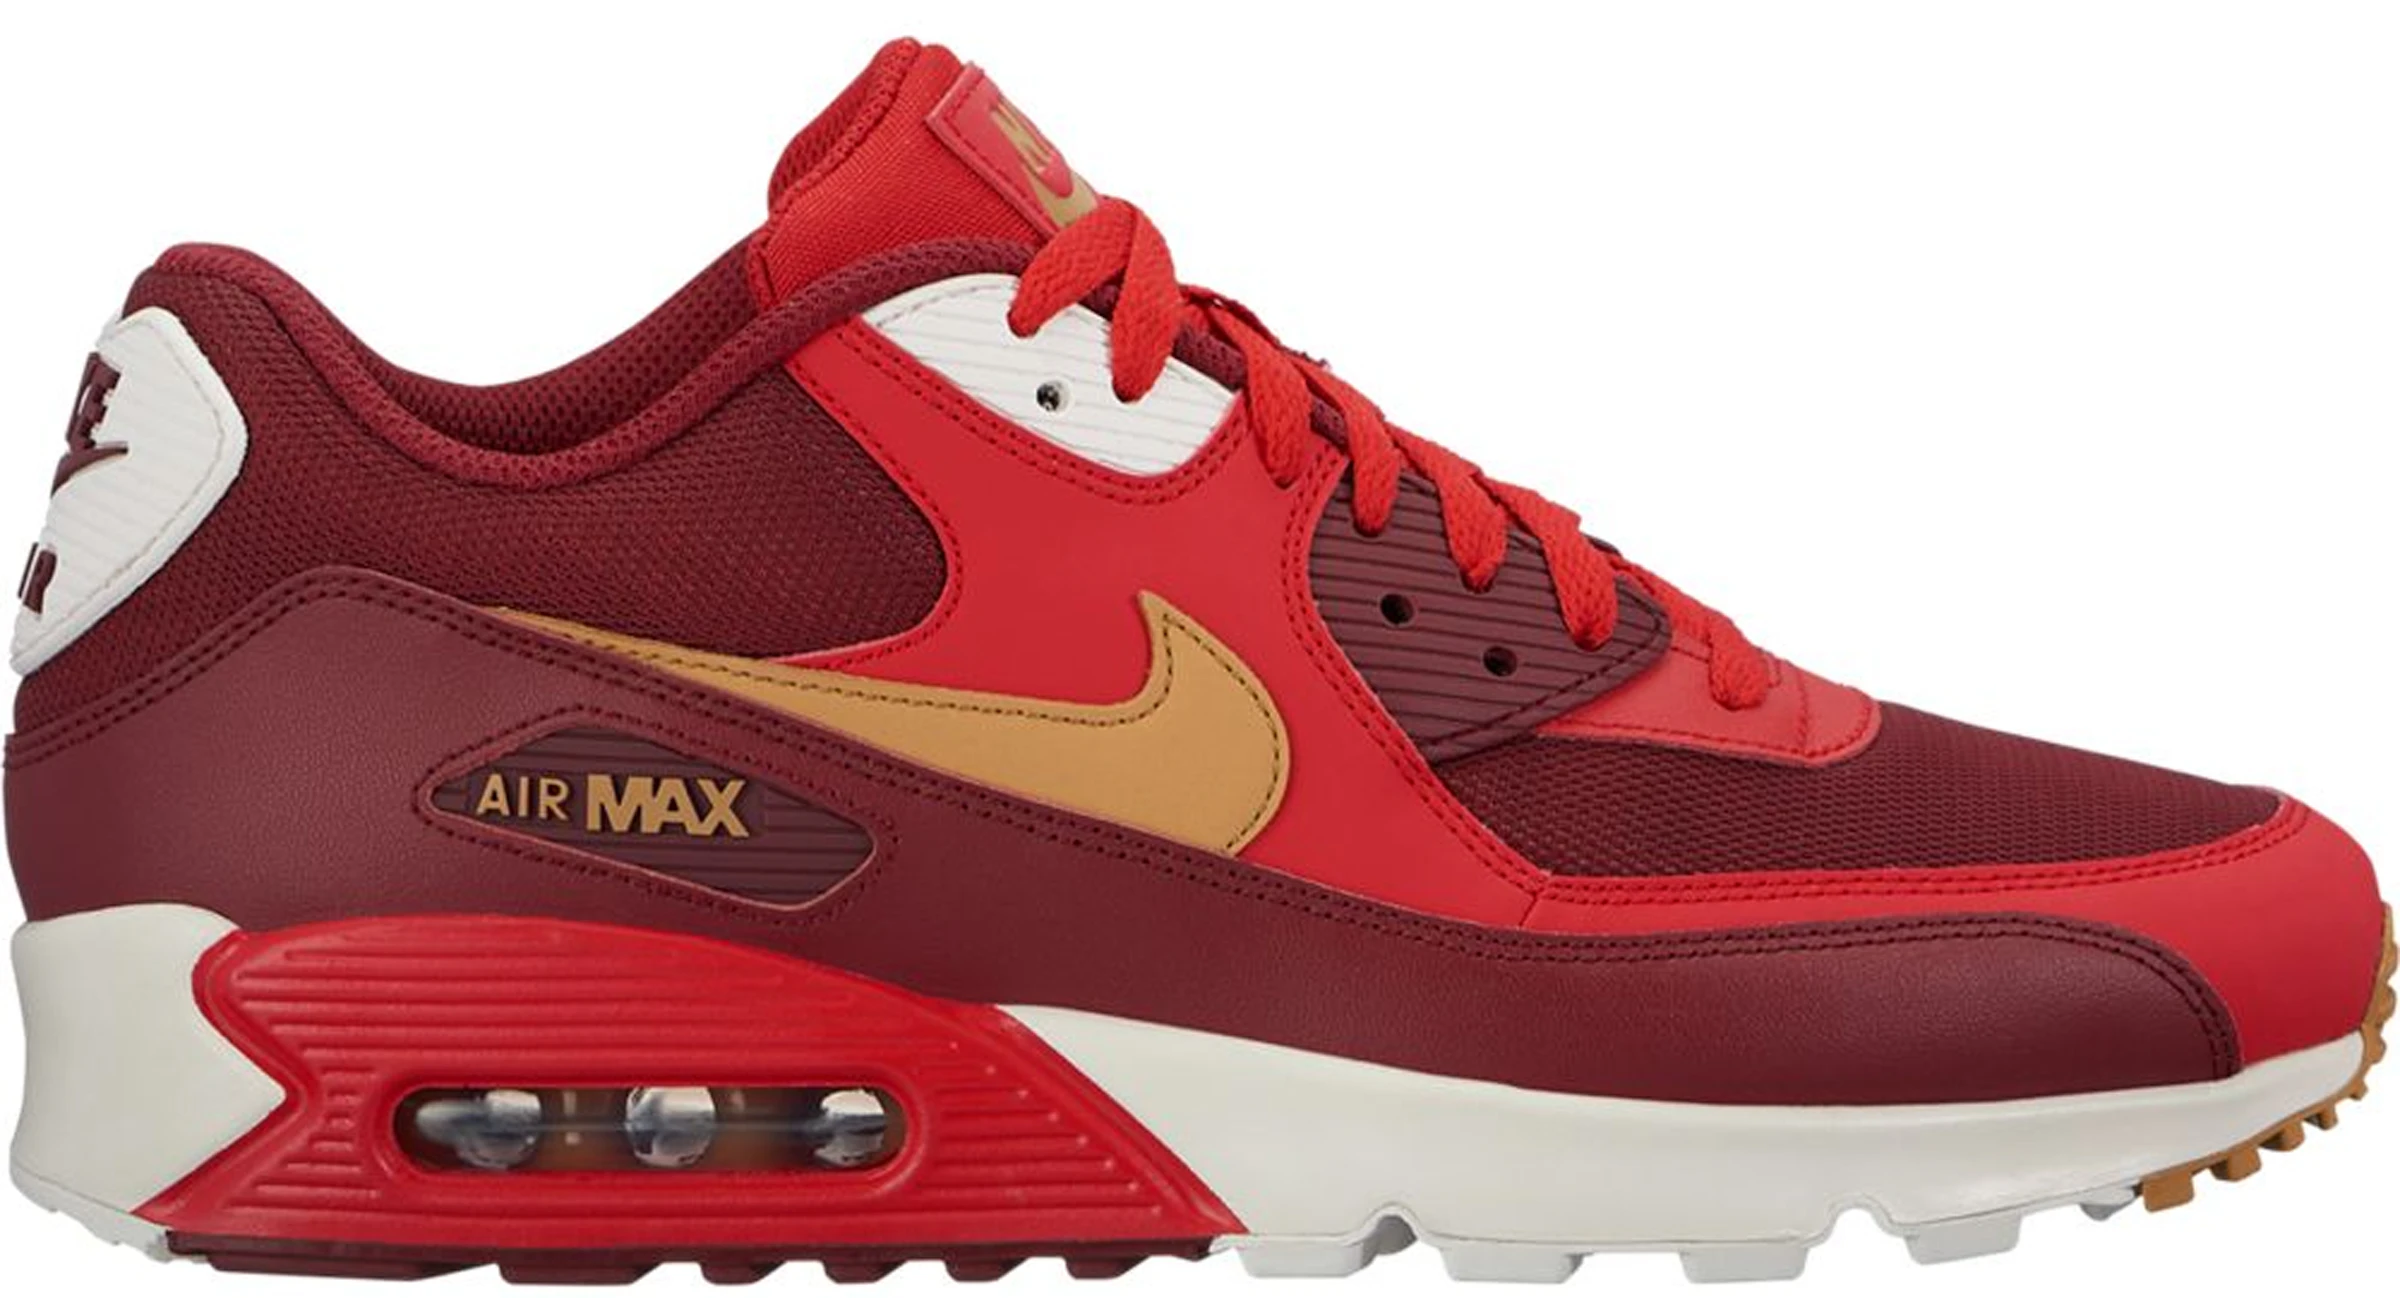 Nike Air Max Game Red Elemental Gold 537384-607 - US